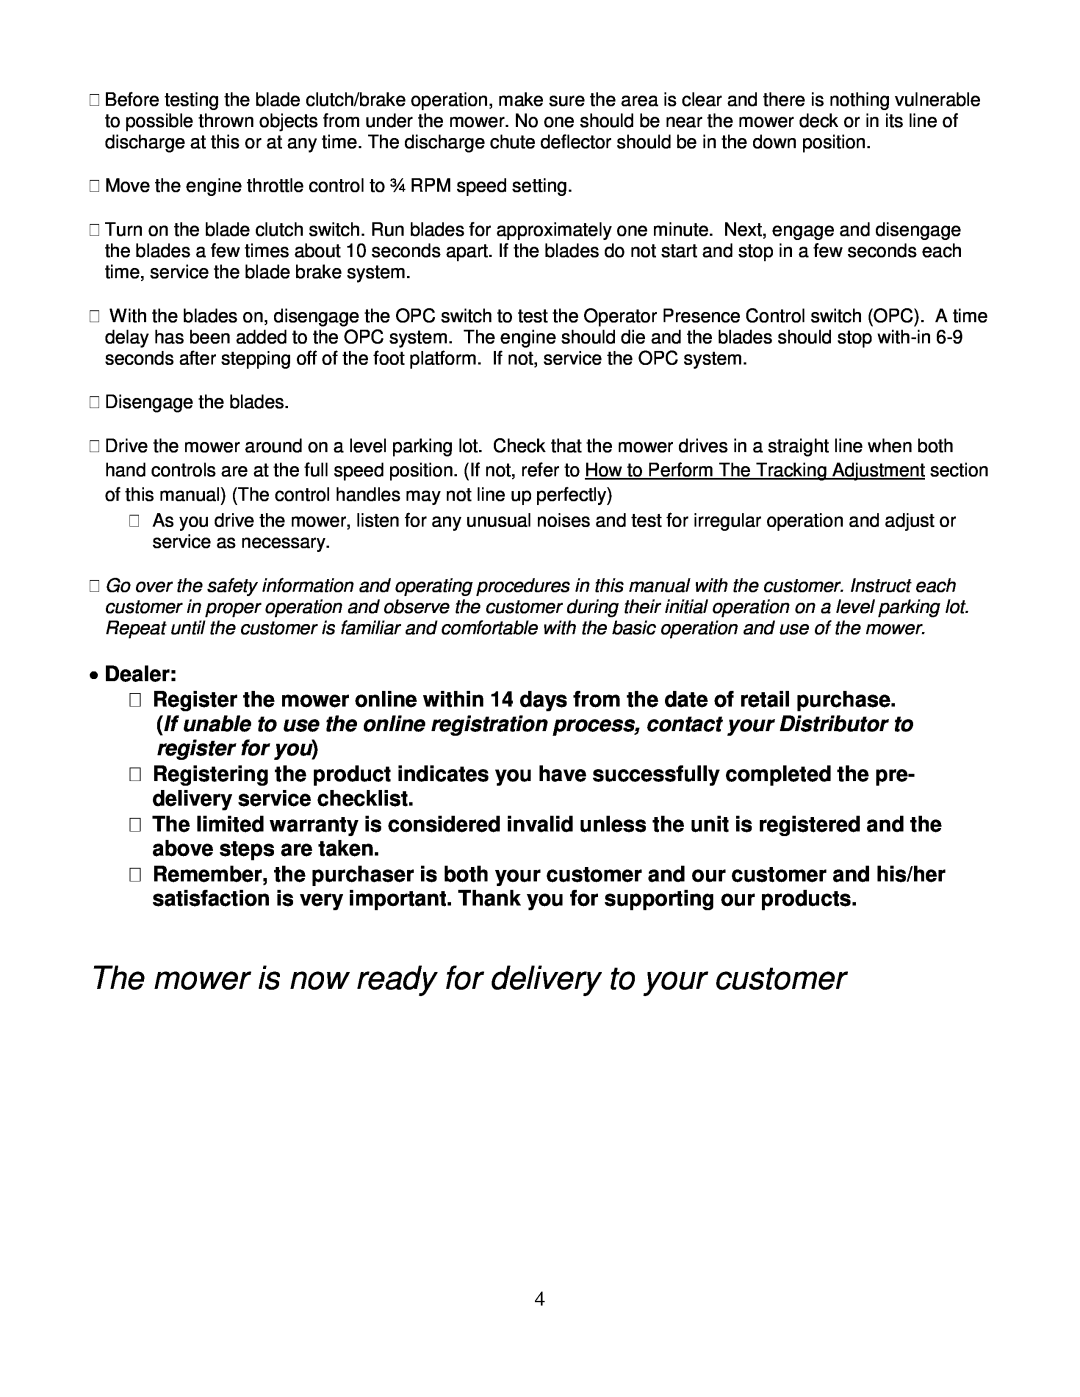 Wright Manufacturing 14SH654 owner manual The mower is now ready for delivery to your customer, Dealer 